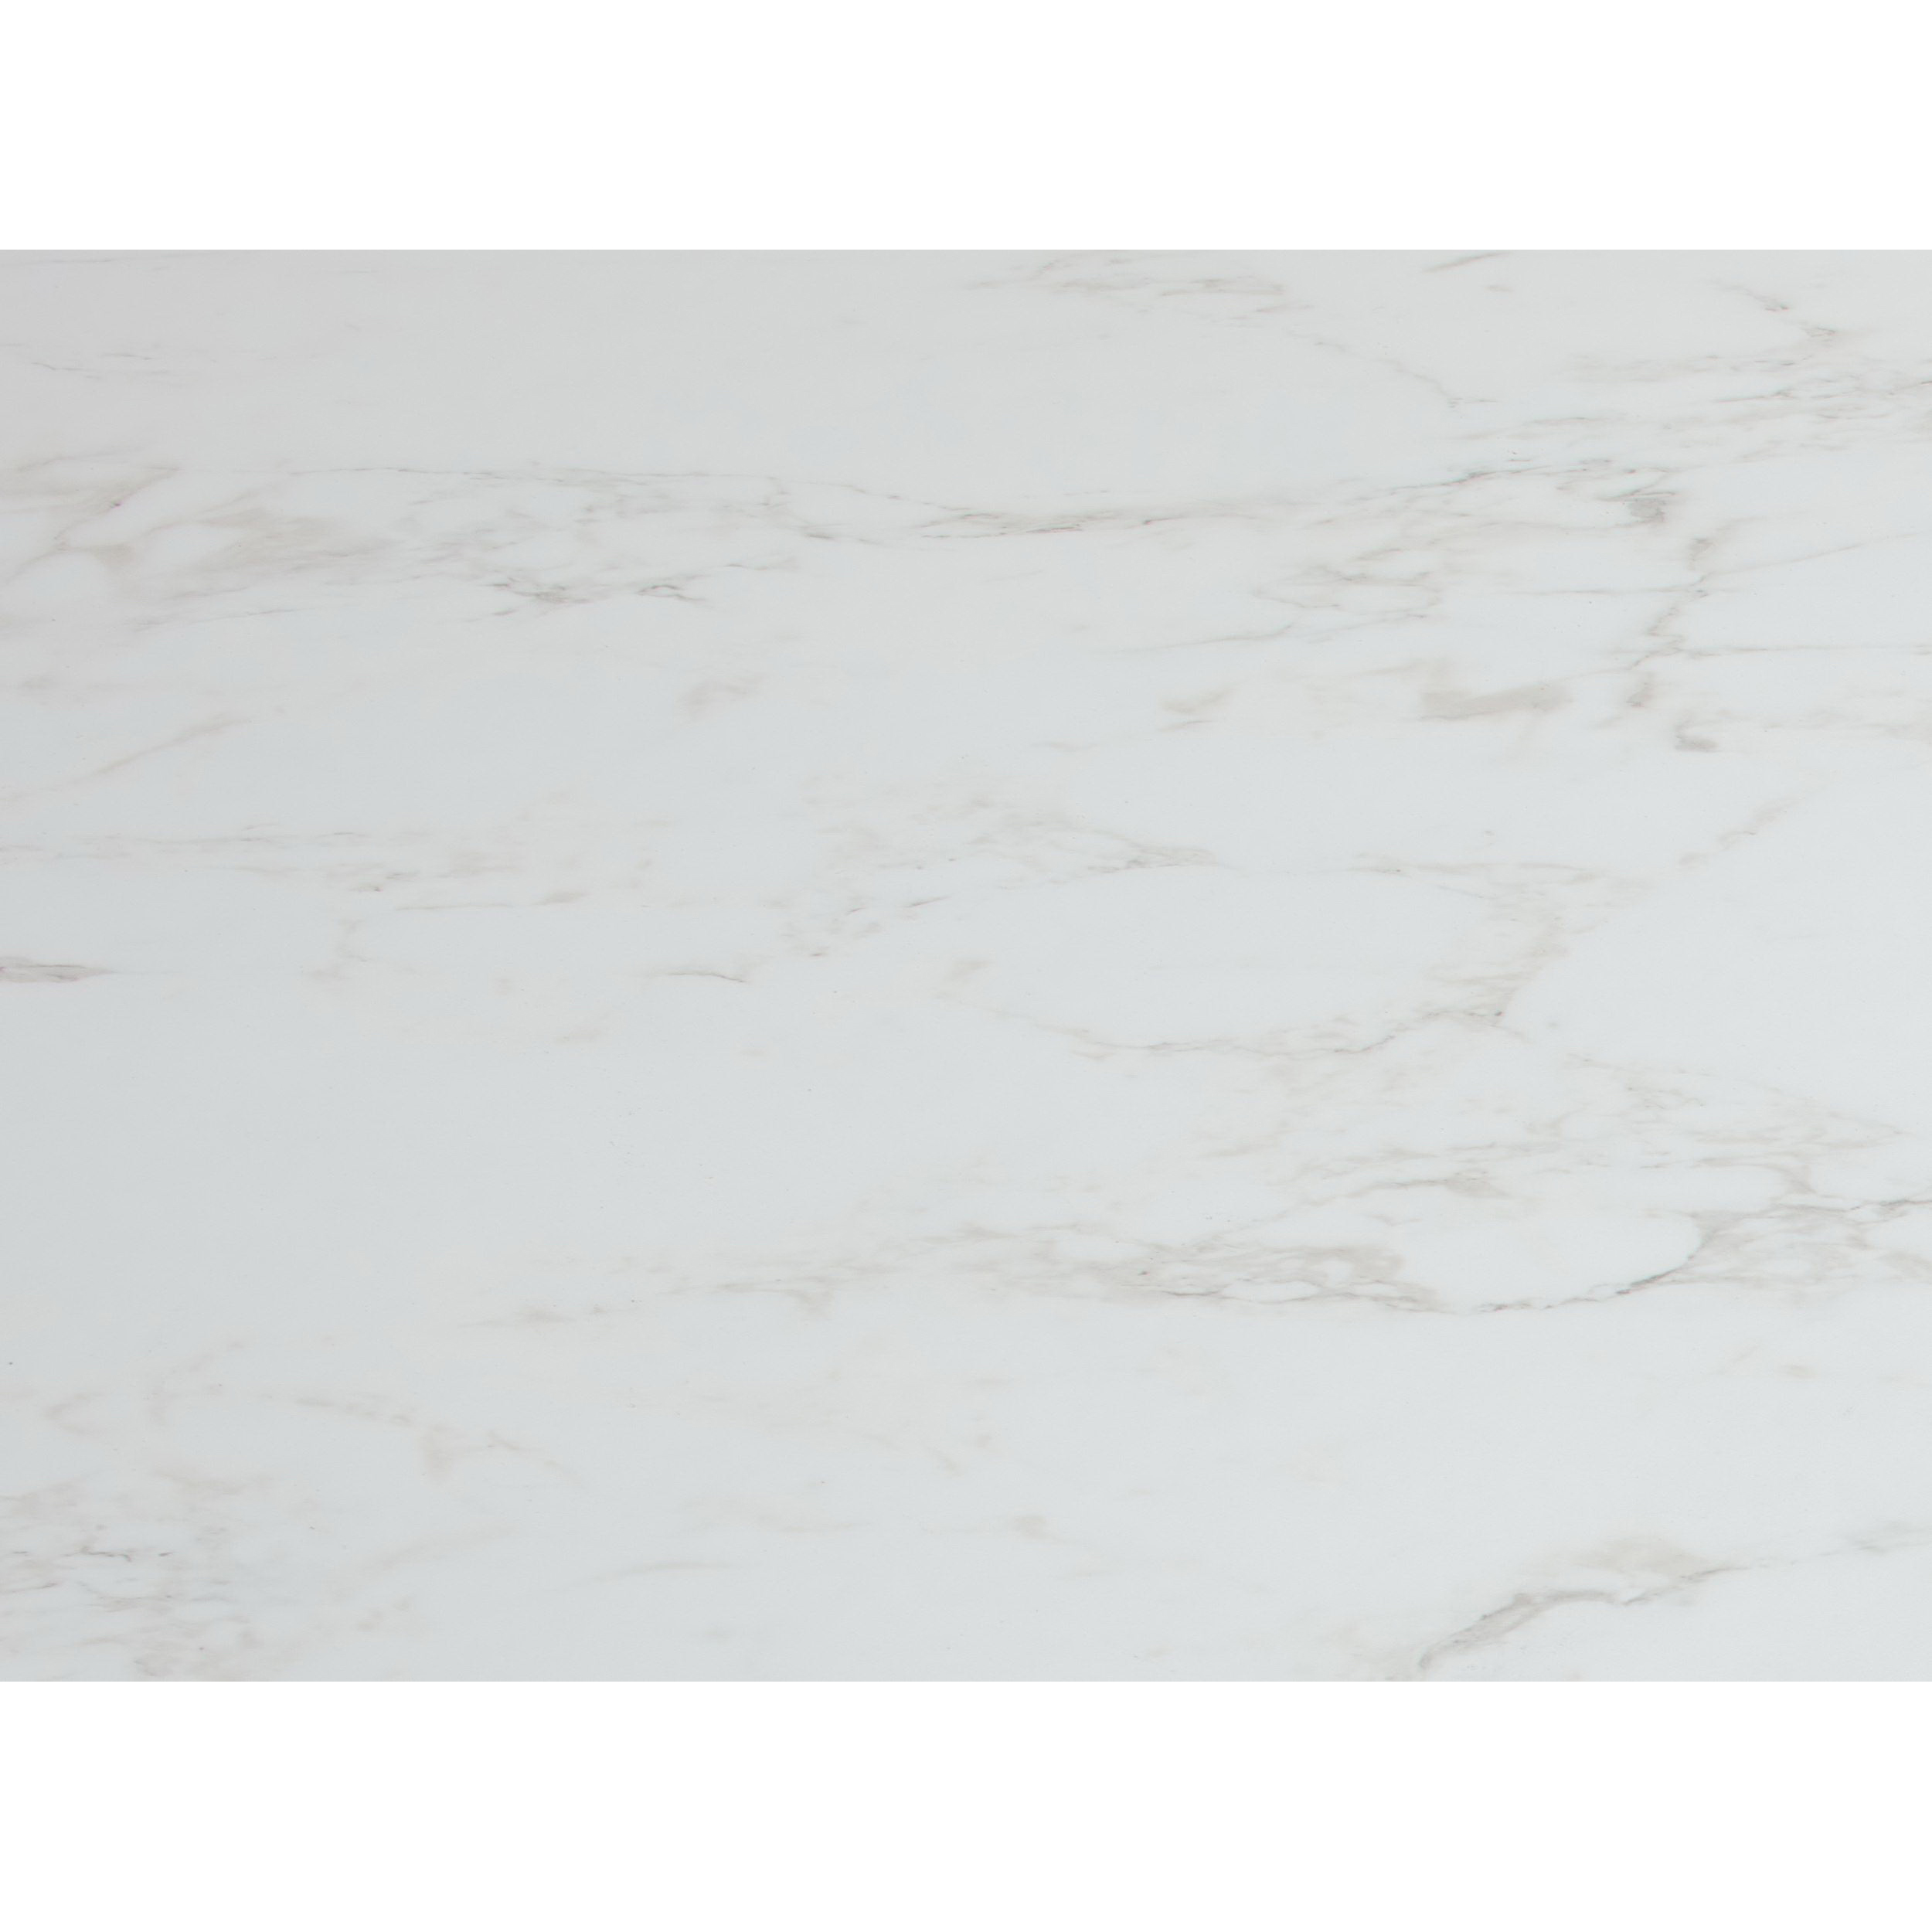 VT Industries Stretta 83183 Countertop, 10 ft L, 25 in D, 1-1/8 in Thick, White Marble, Sleek Edge